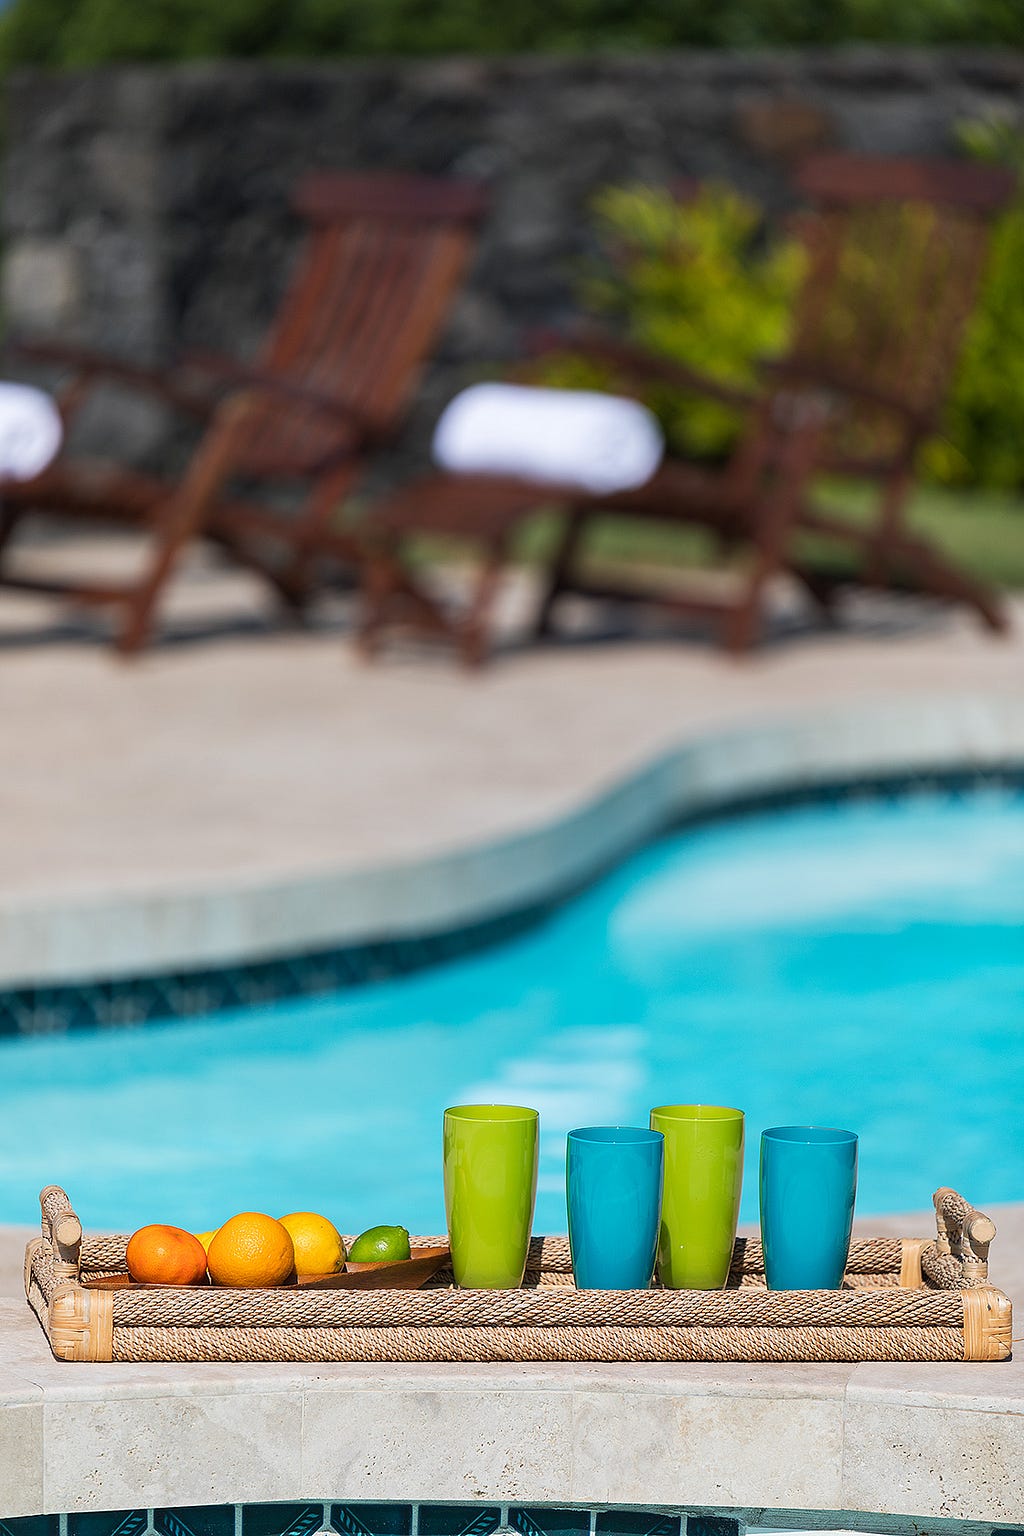 Pool in the background. A woven tray displaying green plastic glasses and fruit in the foreground.